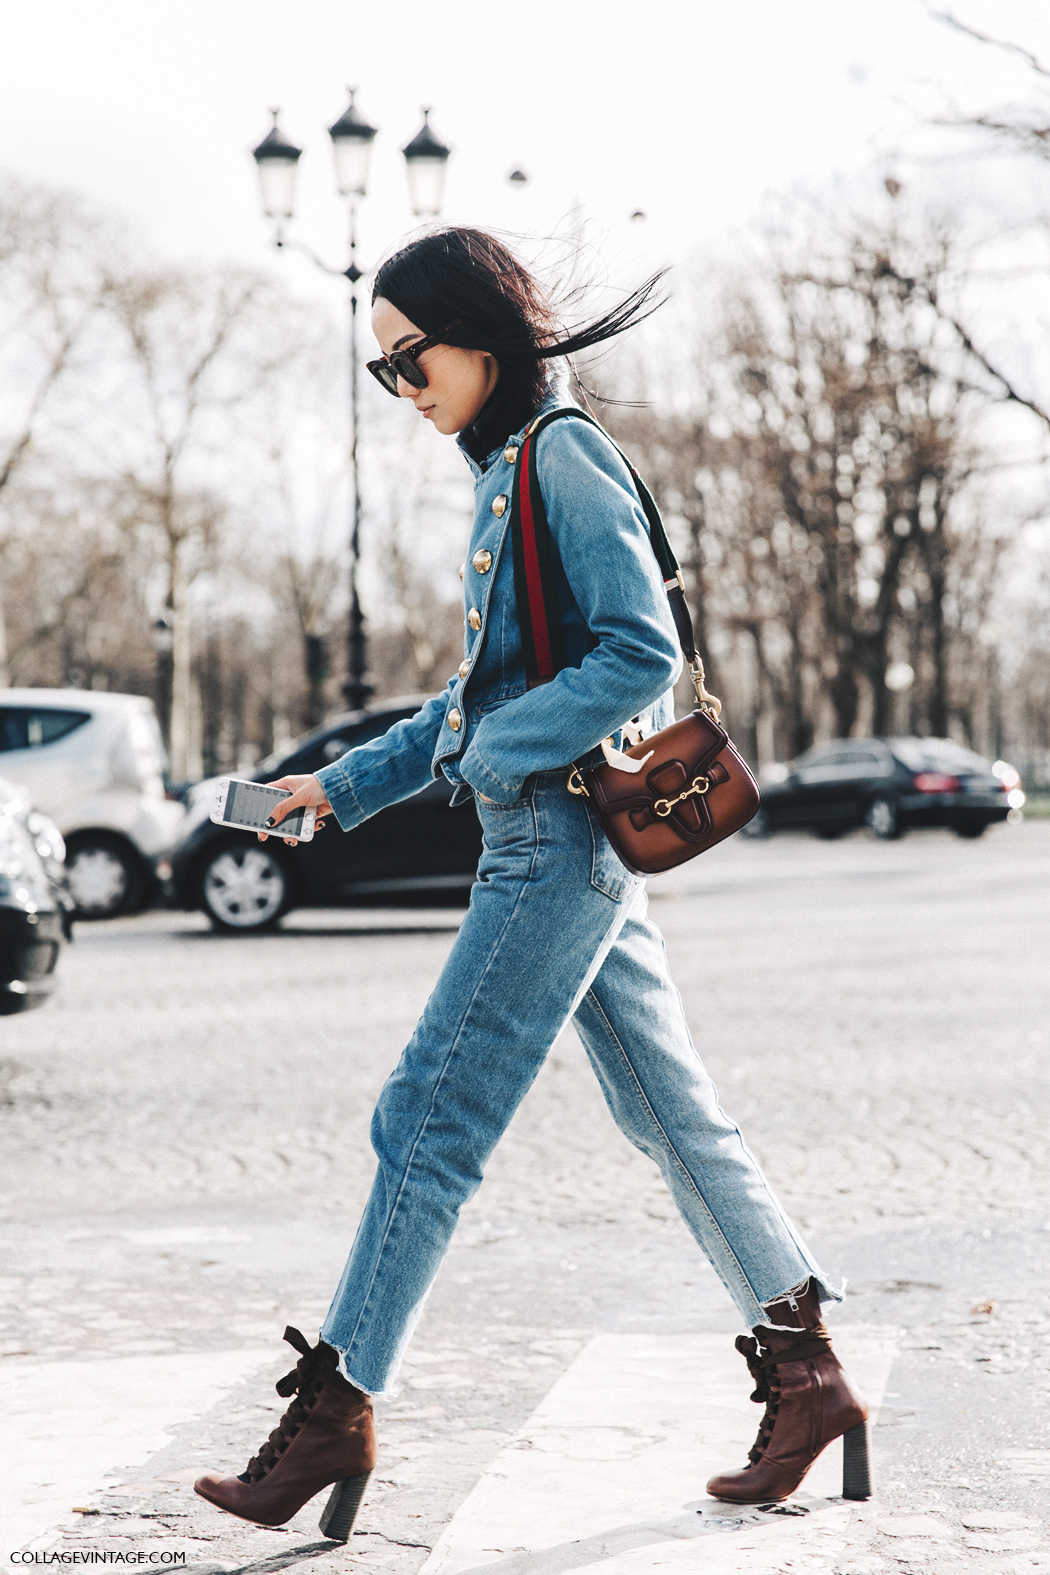 PFW-Paris_Fashion_Week_Fall_2016-Street_Style-Collage_Vintage-Yoyo_Cao-Denim_Outfit-Gucci_Bag-Chloe_Lace_Up_Sandals-2